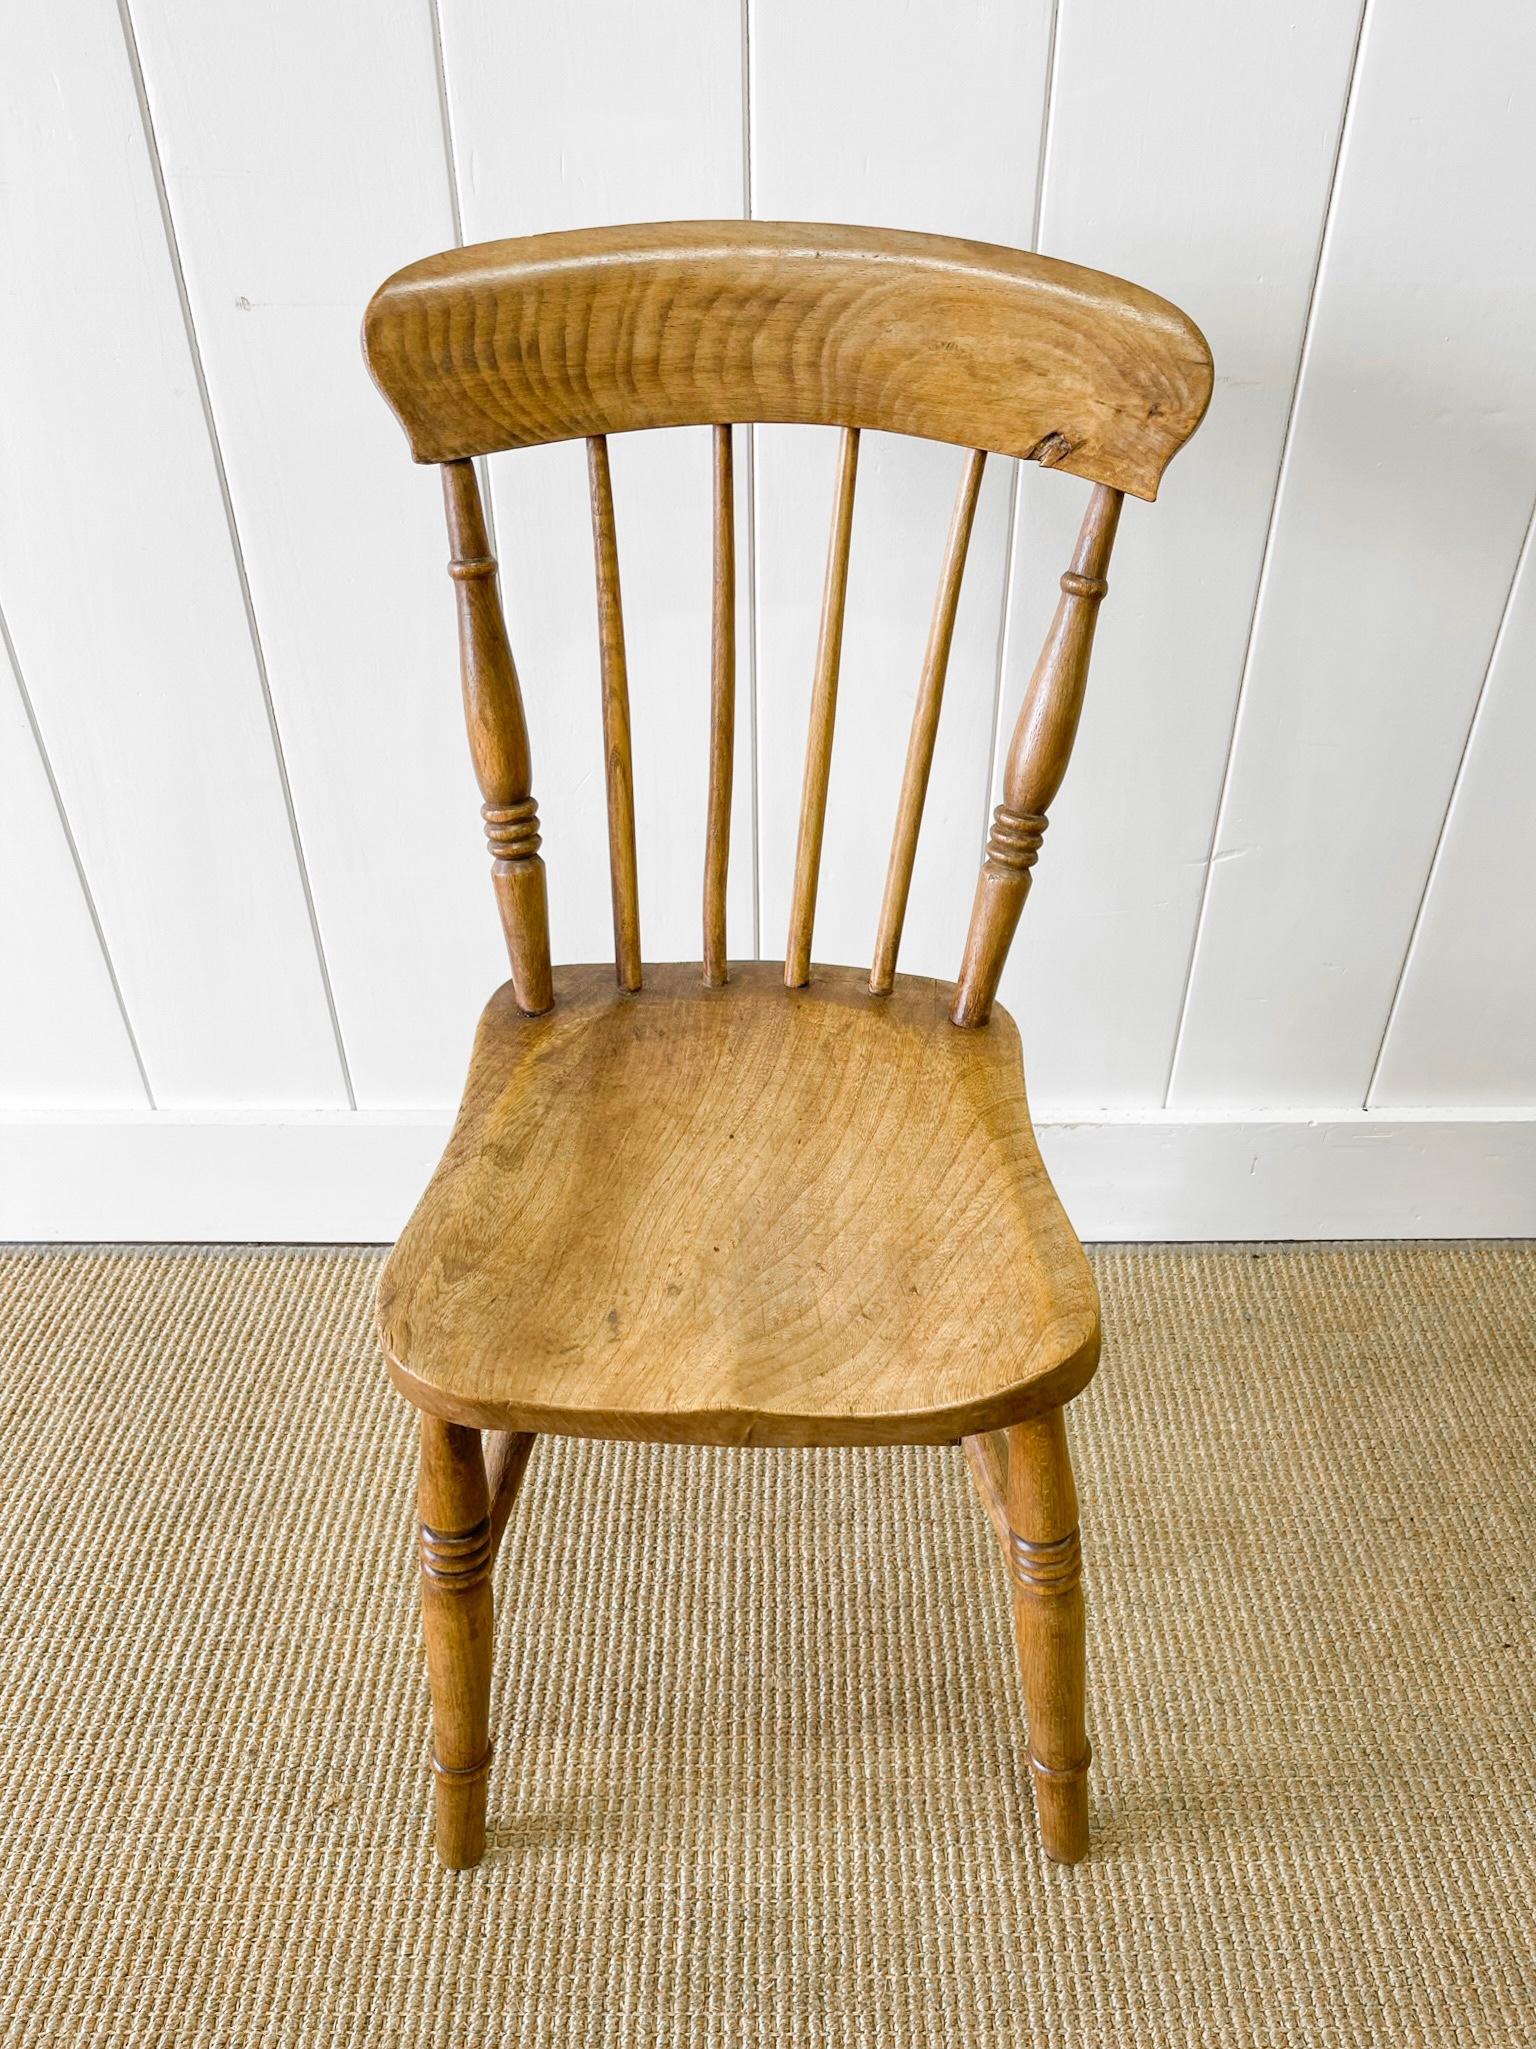 An Antique Set of 4 Early 19th Century Stick Back Chairs For Sale 2